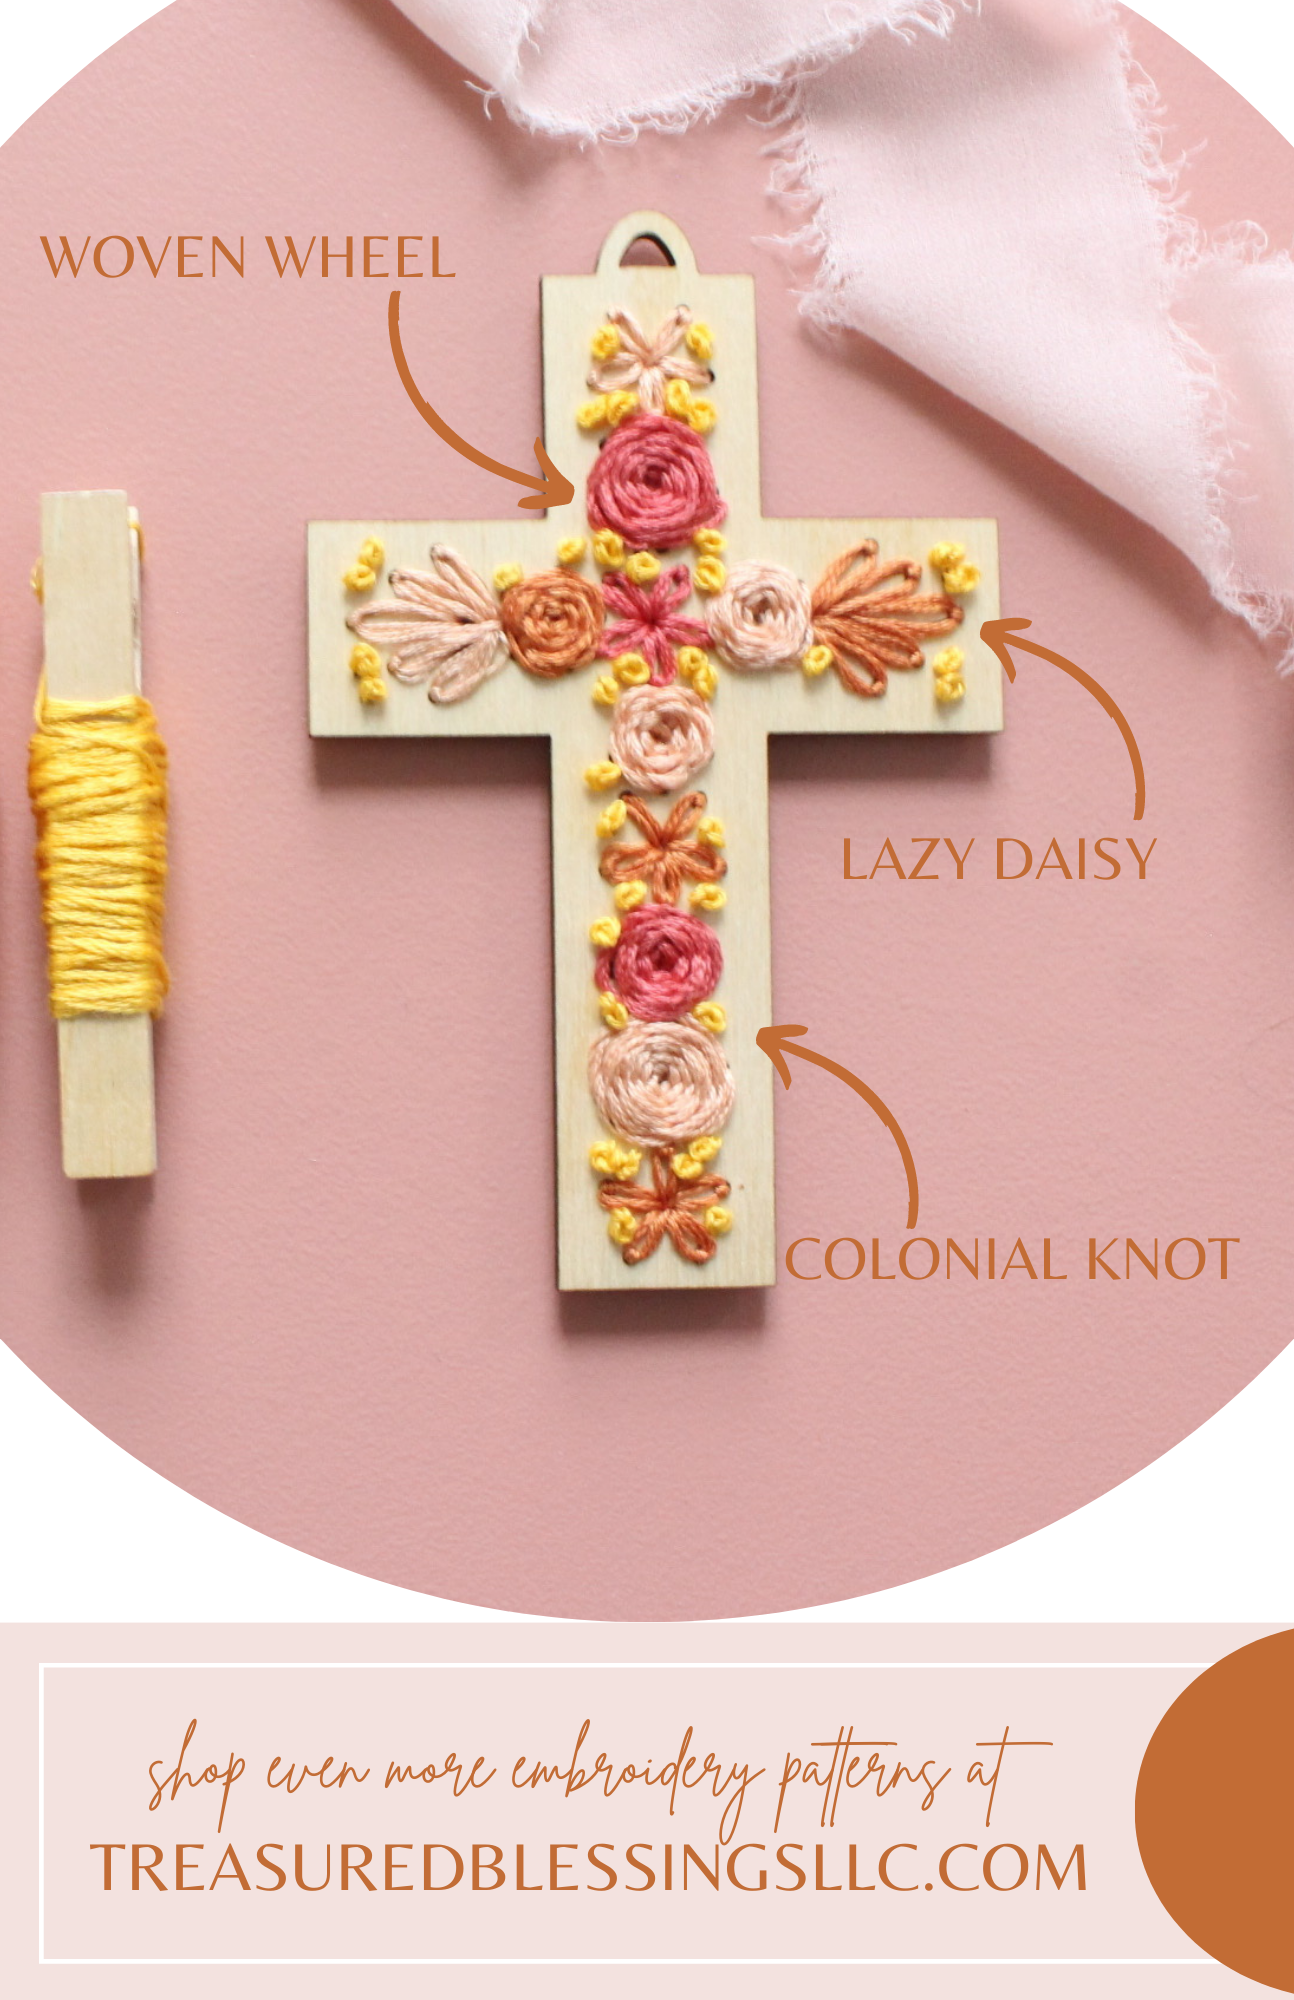 Wood Embroidery Kit - Floral Cross